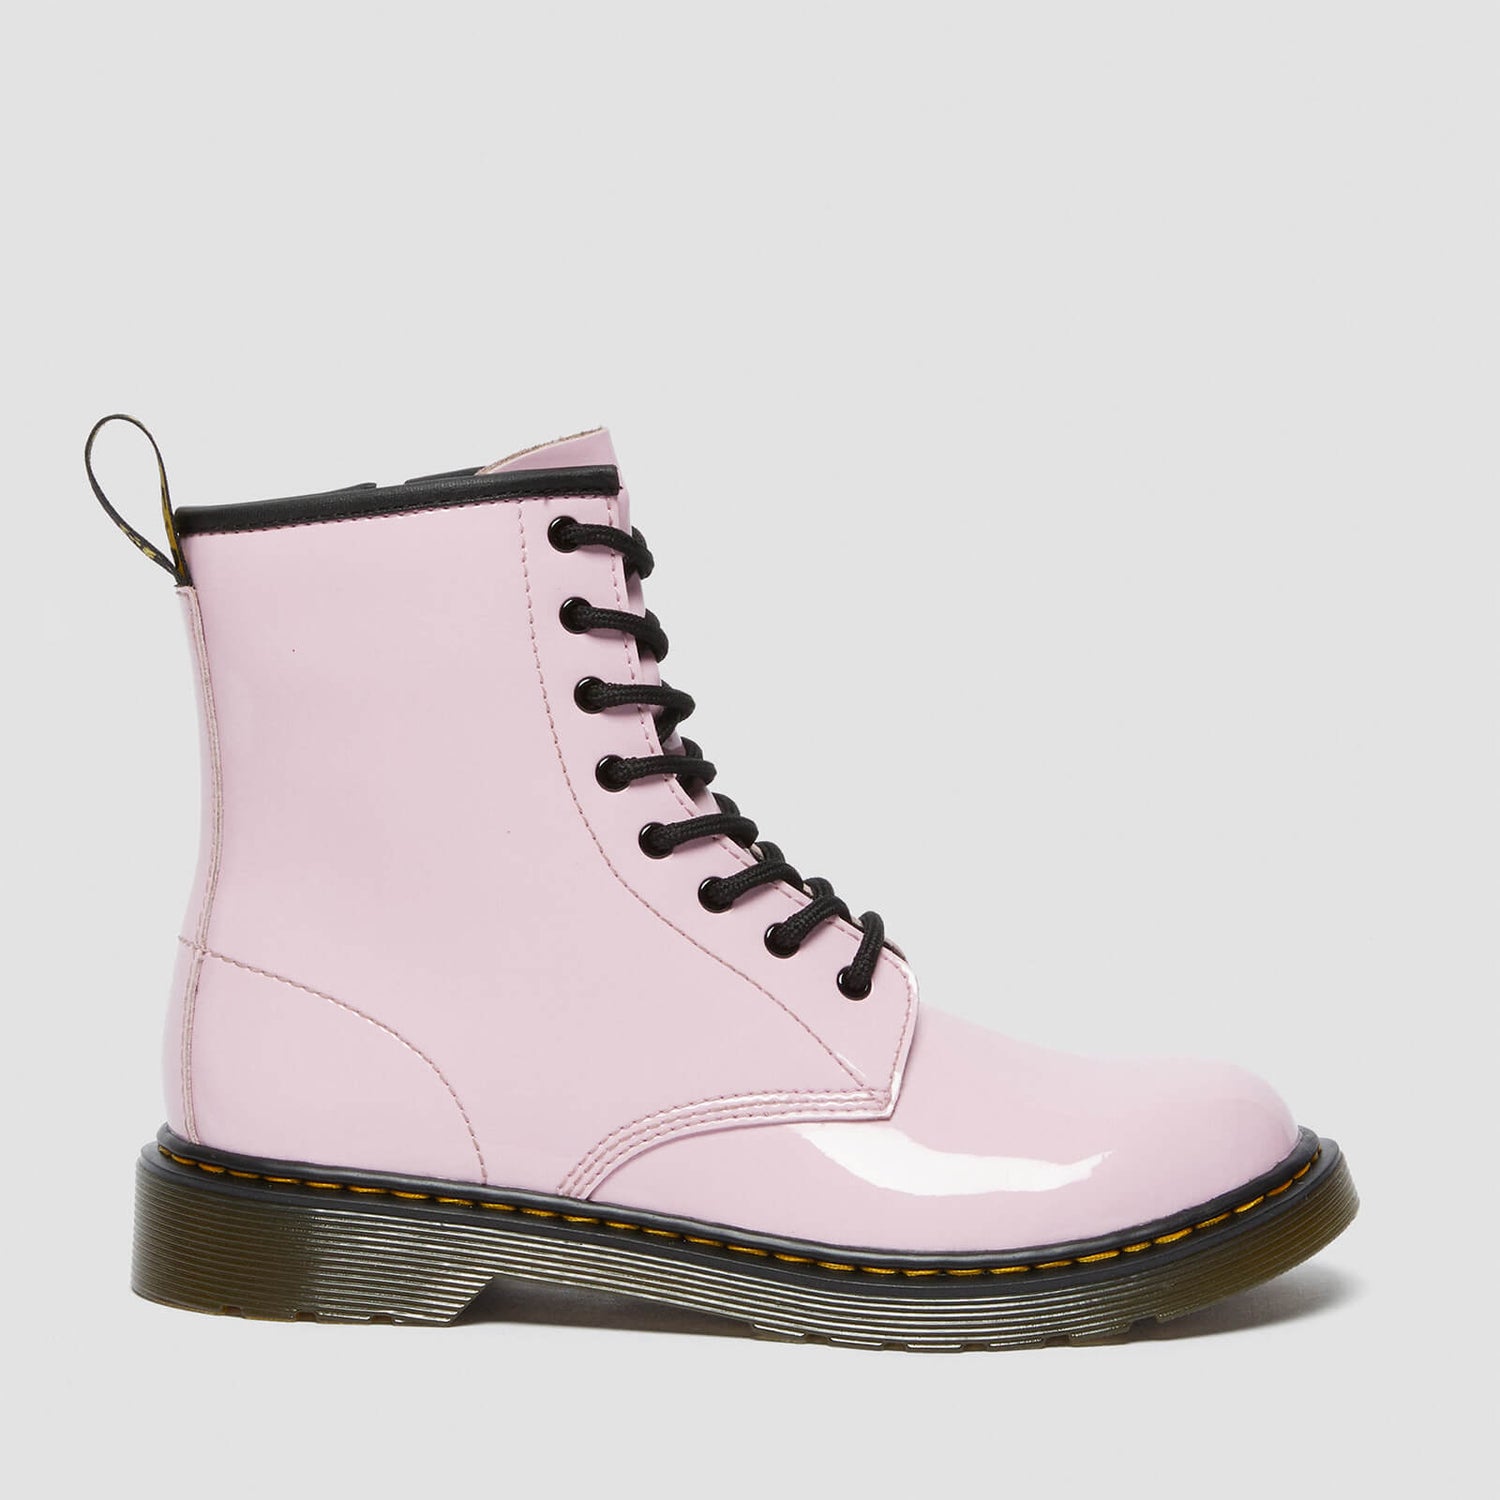 Dr. Martens Toddlers' 1460 Patent Lamper Boots - Pale Pink - UK 4 Baby